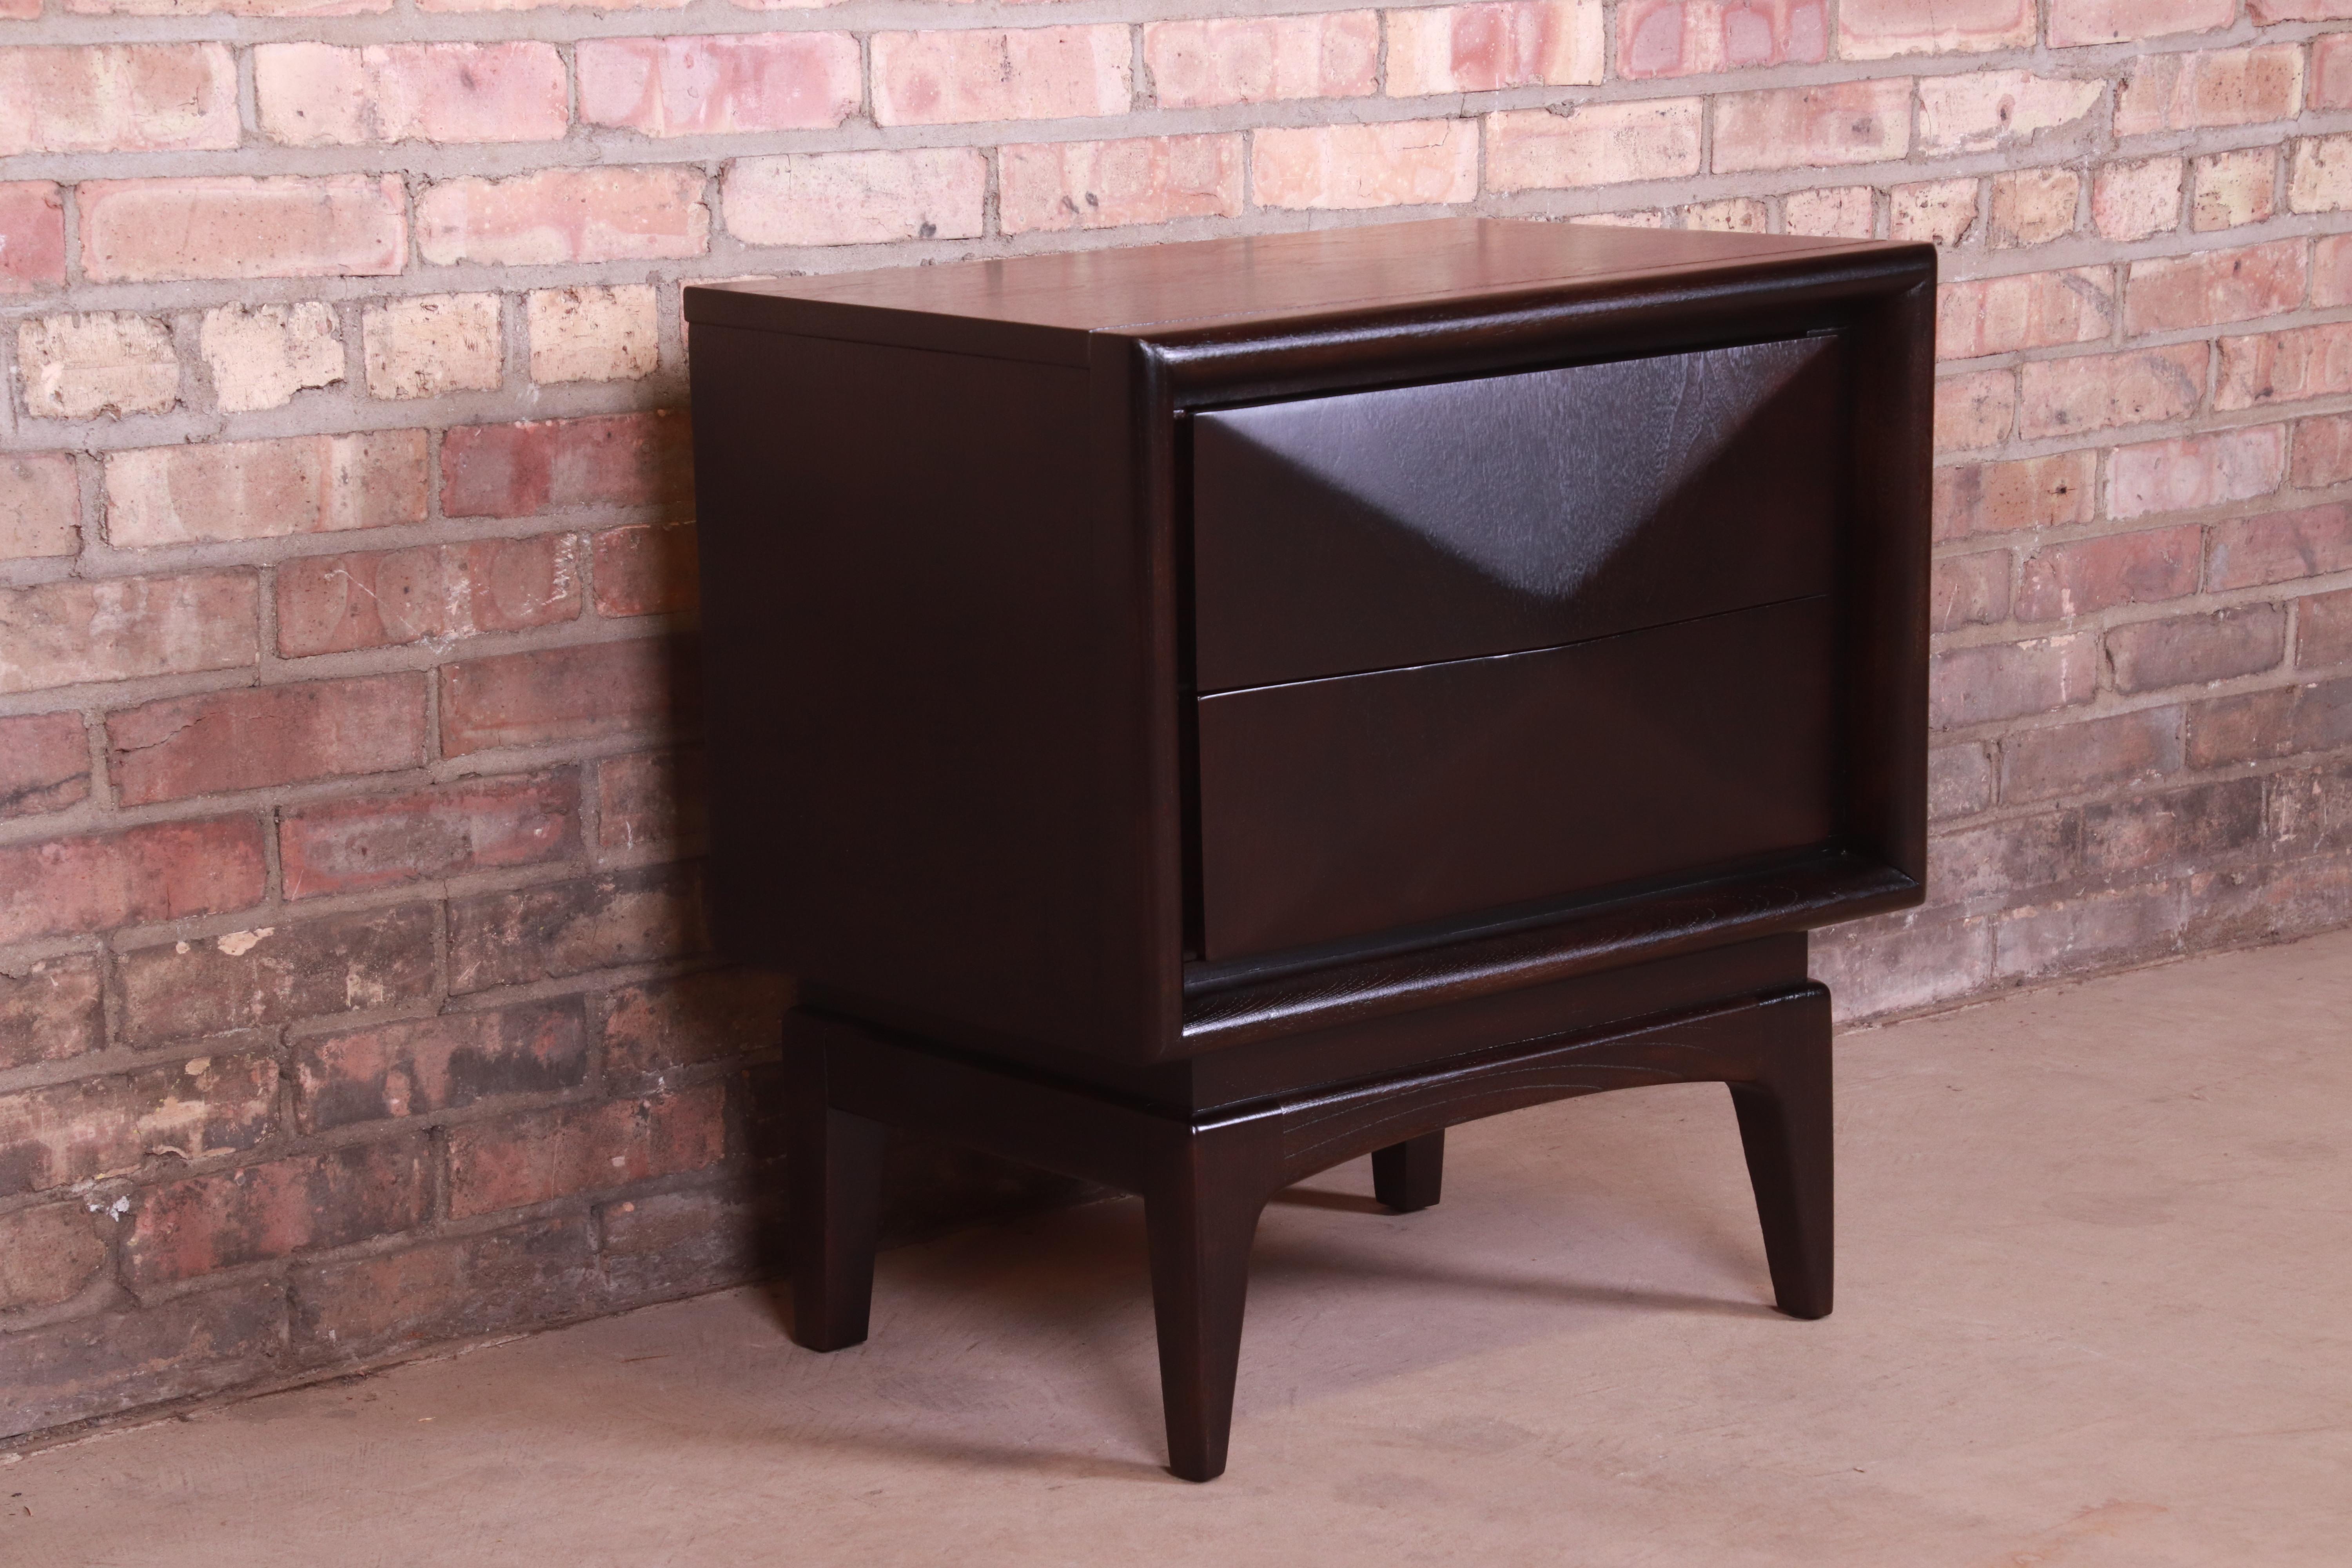 A stunning mid-century modern diamond front nightstand

In the manner of Vladimir Kagan

By United Furniture Co.

USA, 1960s

Ebonized walnut, with unique sculpted diamond front design.

Measures: 23